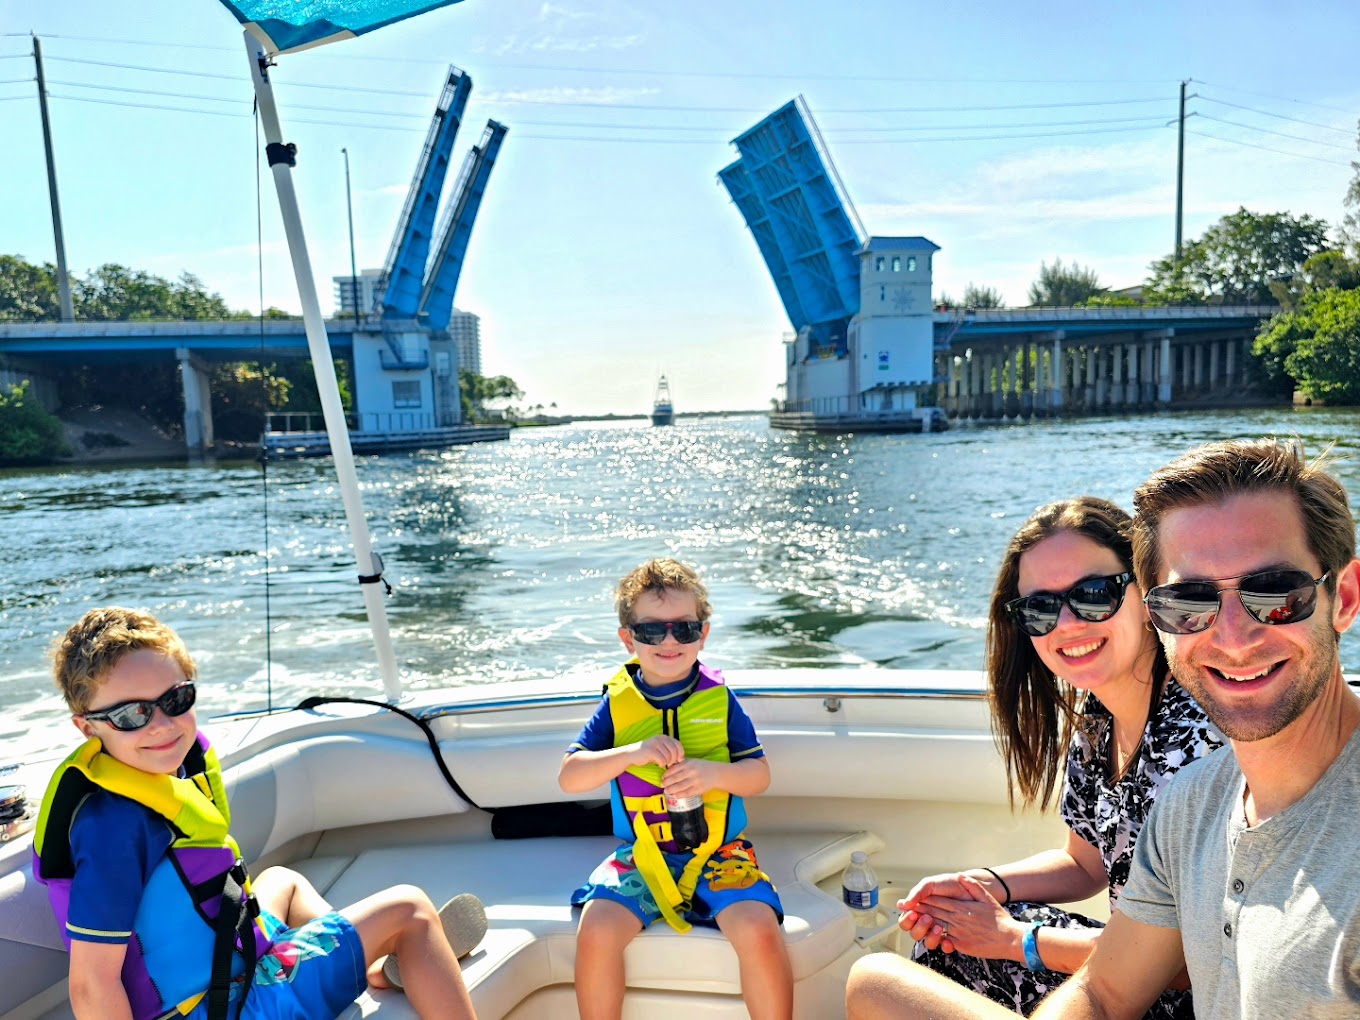 What Are The Best Boat Sightseeing Tours in West Palm Beach?